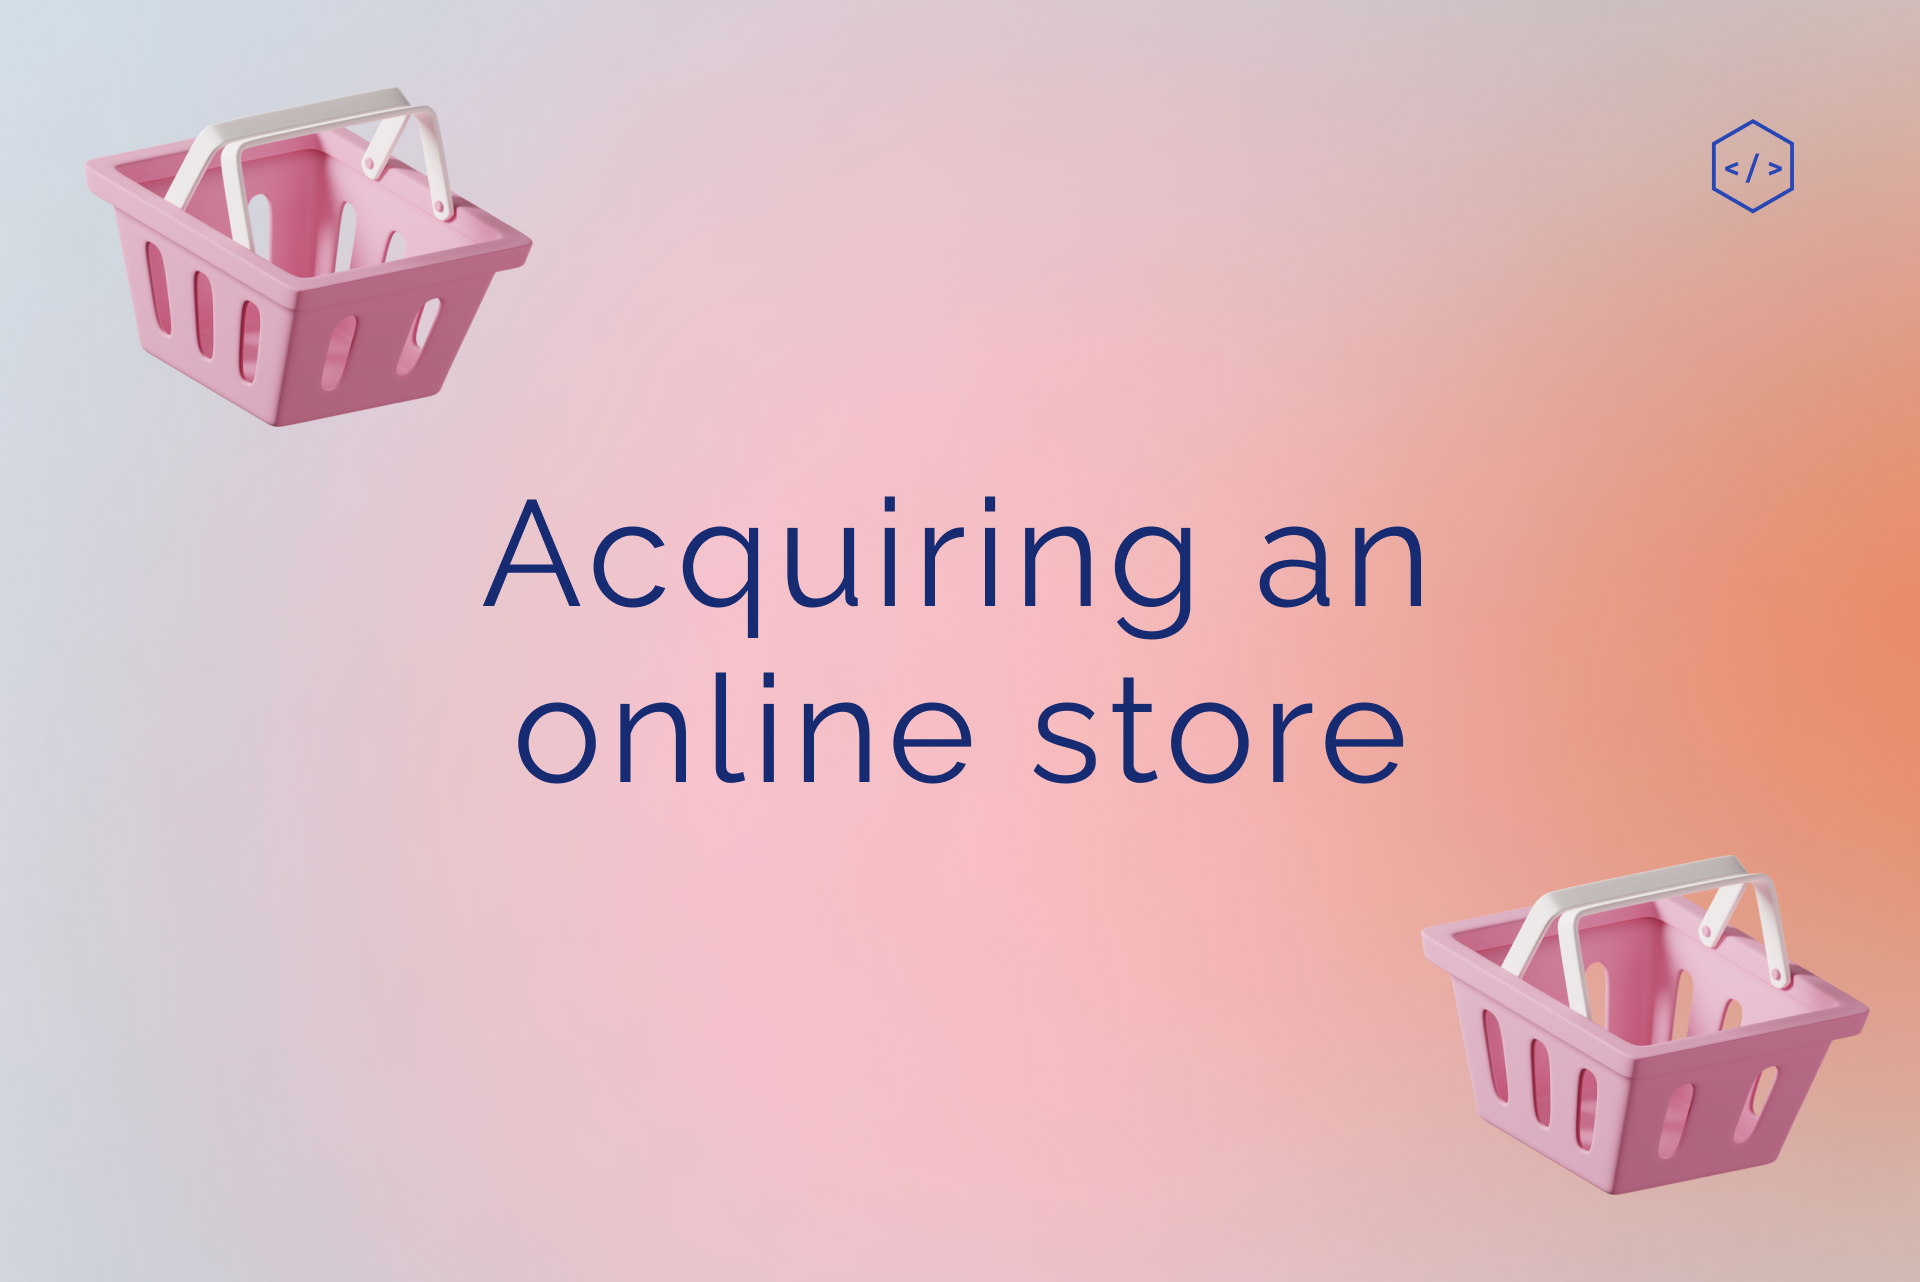 Acquiring an online store: what it is and how it works